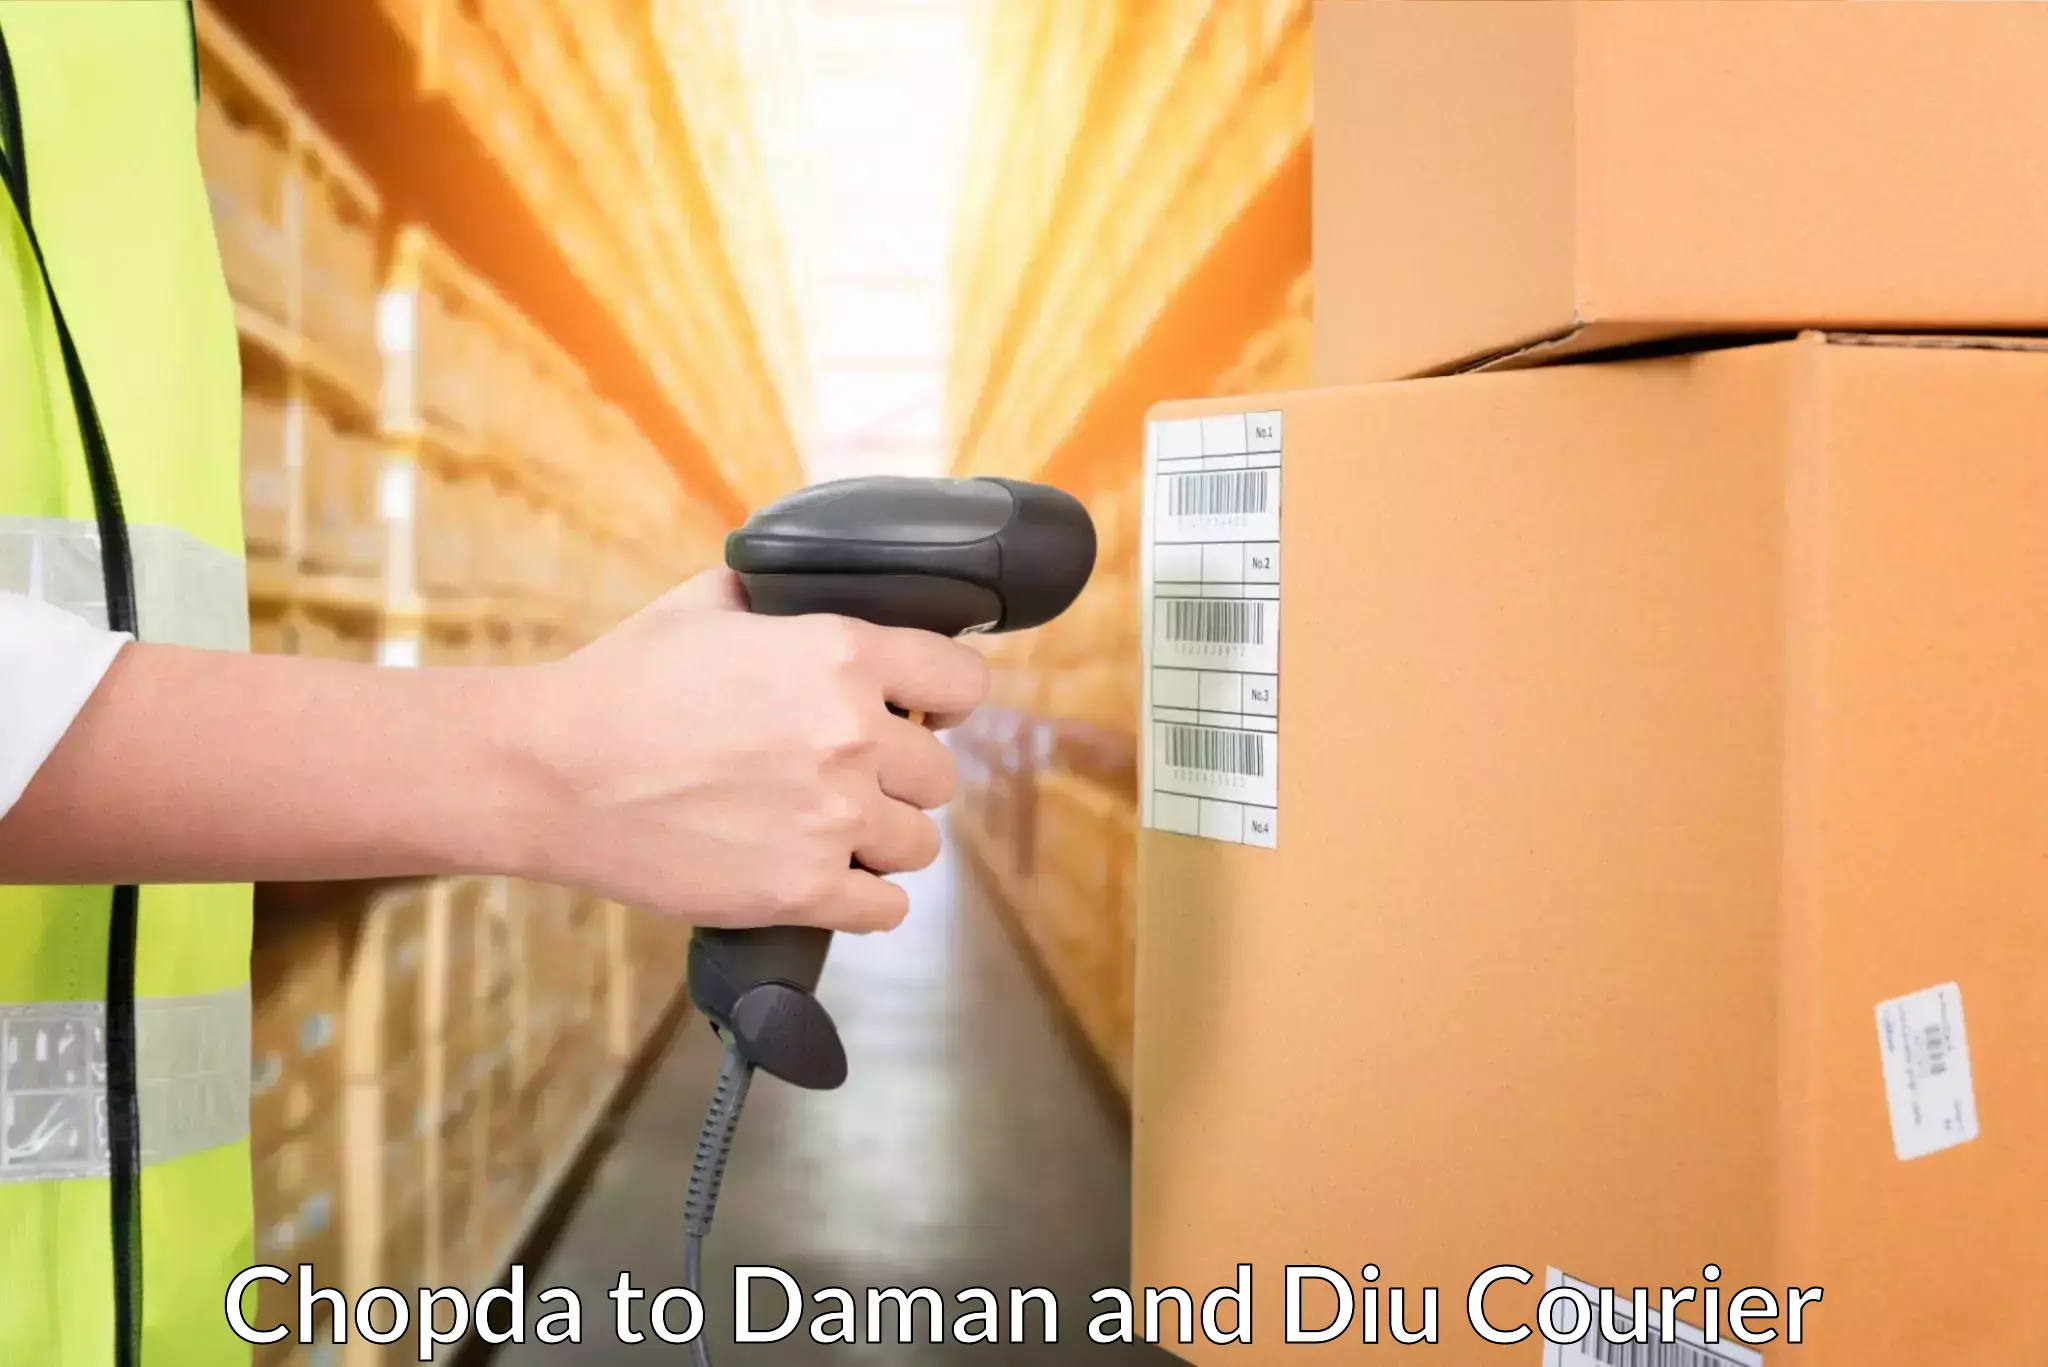 Automated parcel services Chopda to Daman and Diu